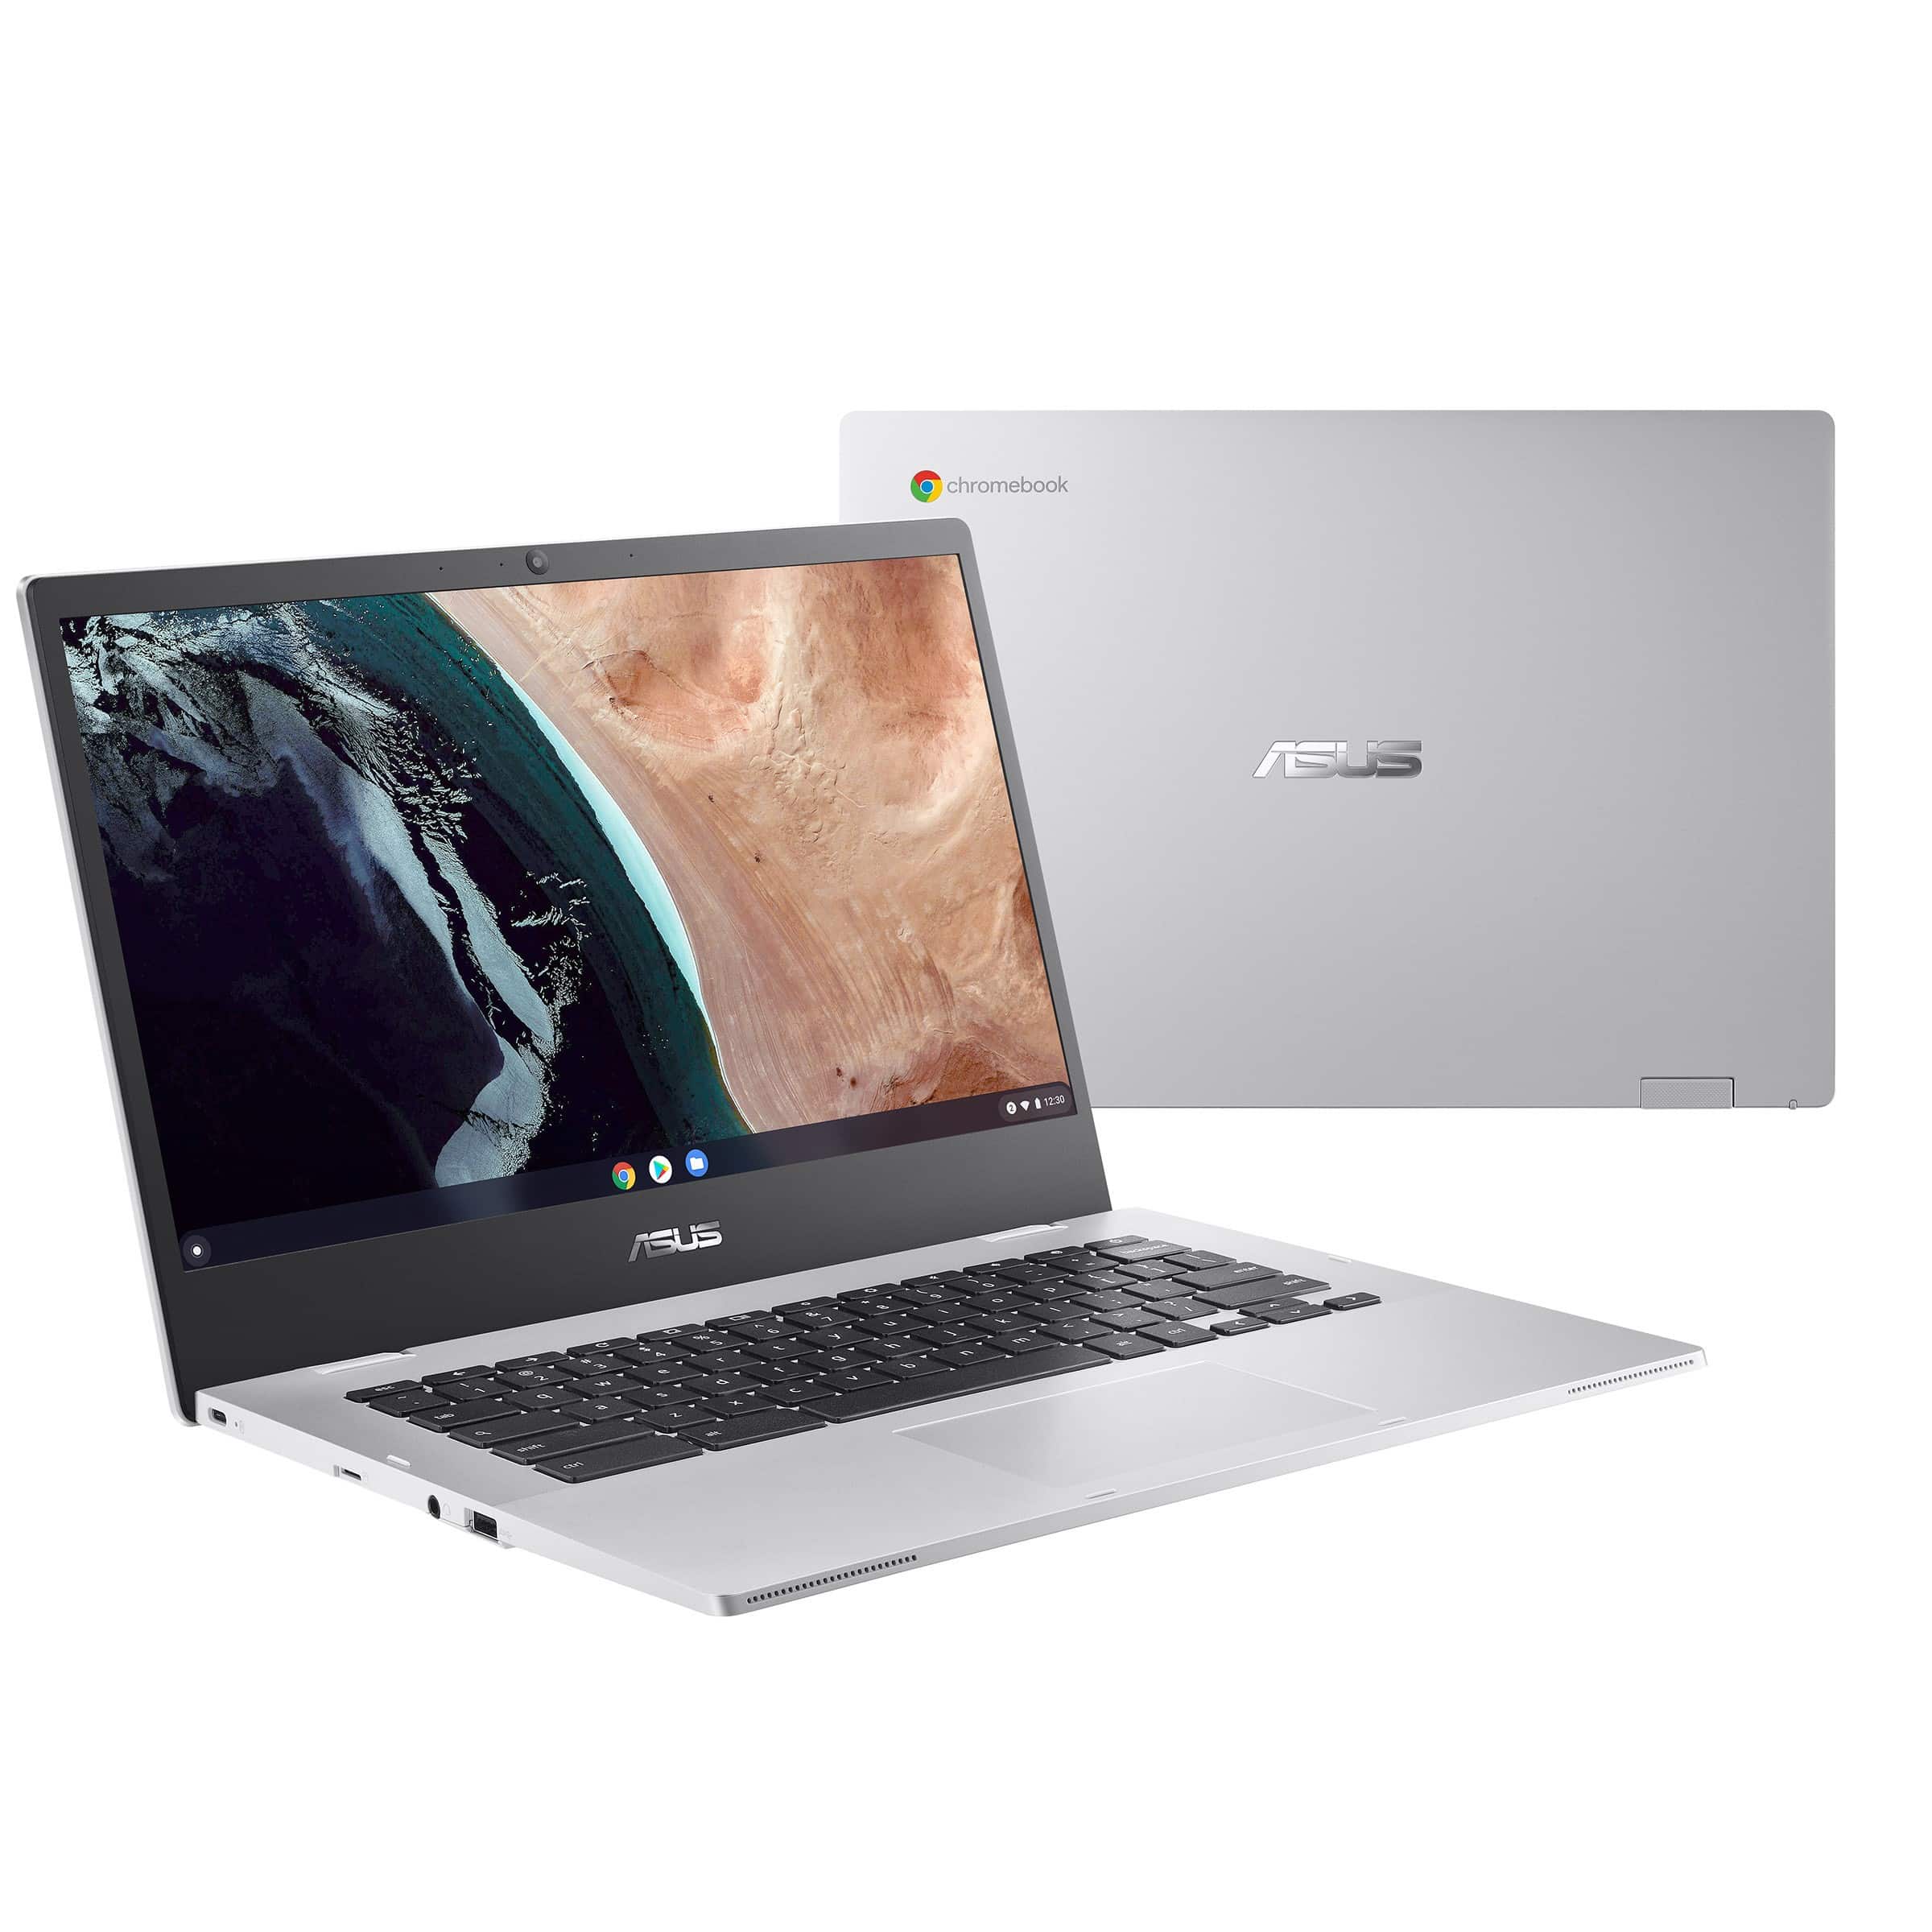 ASUS Chromebook CX1500, CX1400 Features & Specifications